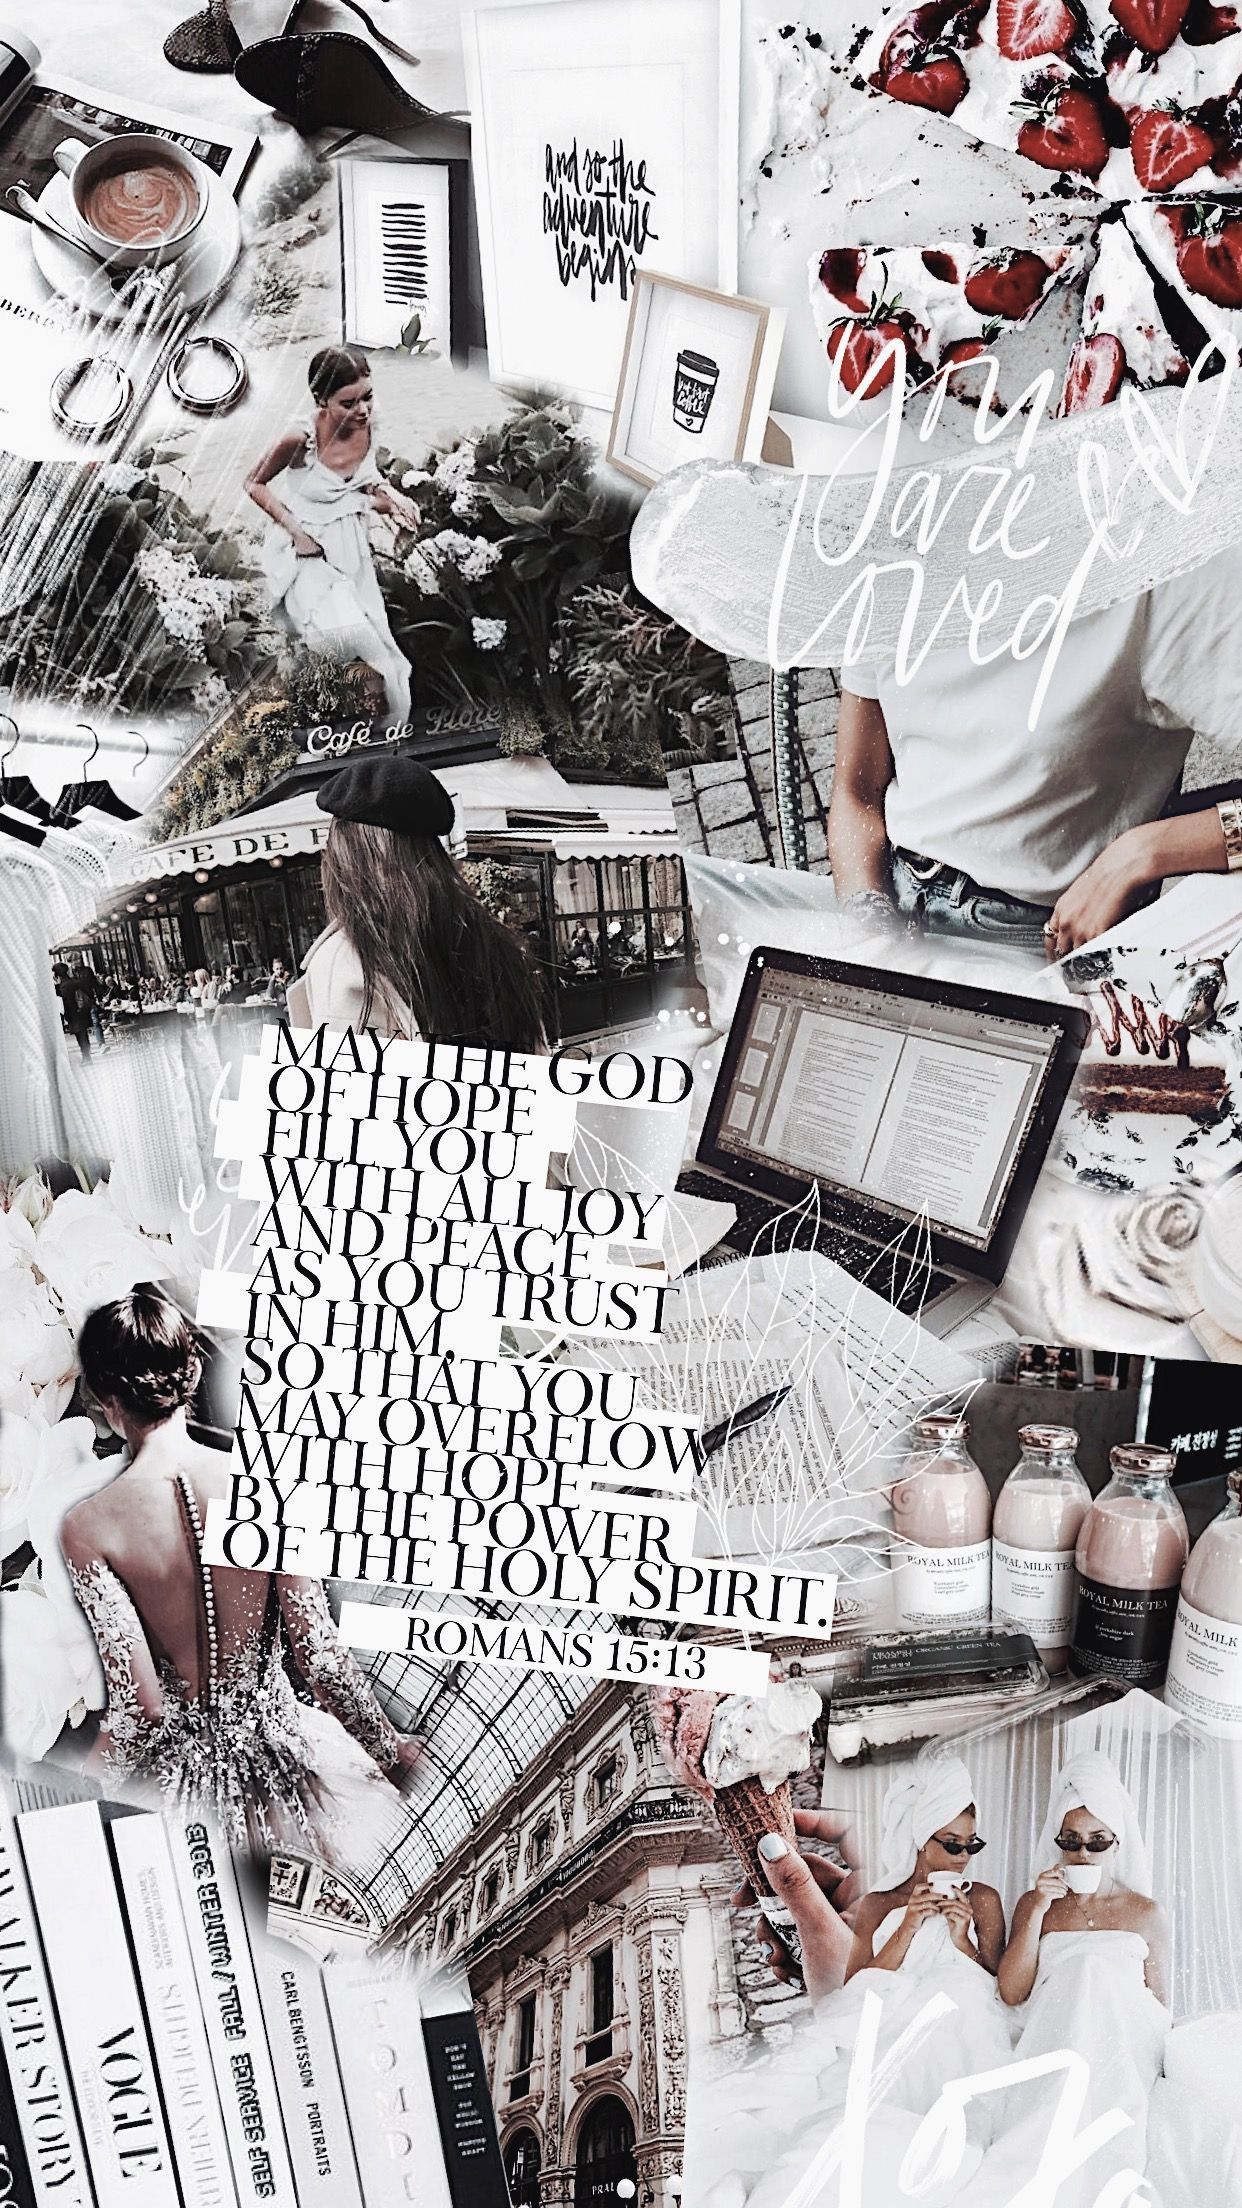 A collage of black and white photos including books, a cup of coffee, and a woman reading. Romans 15:1 is written in the center. - Fashion, Vogue, Dior